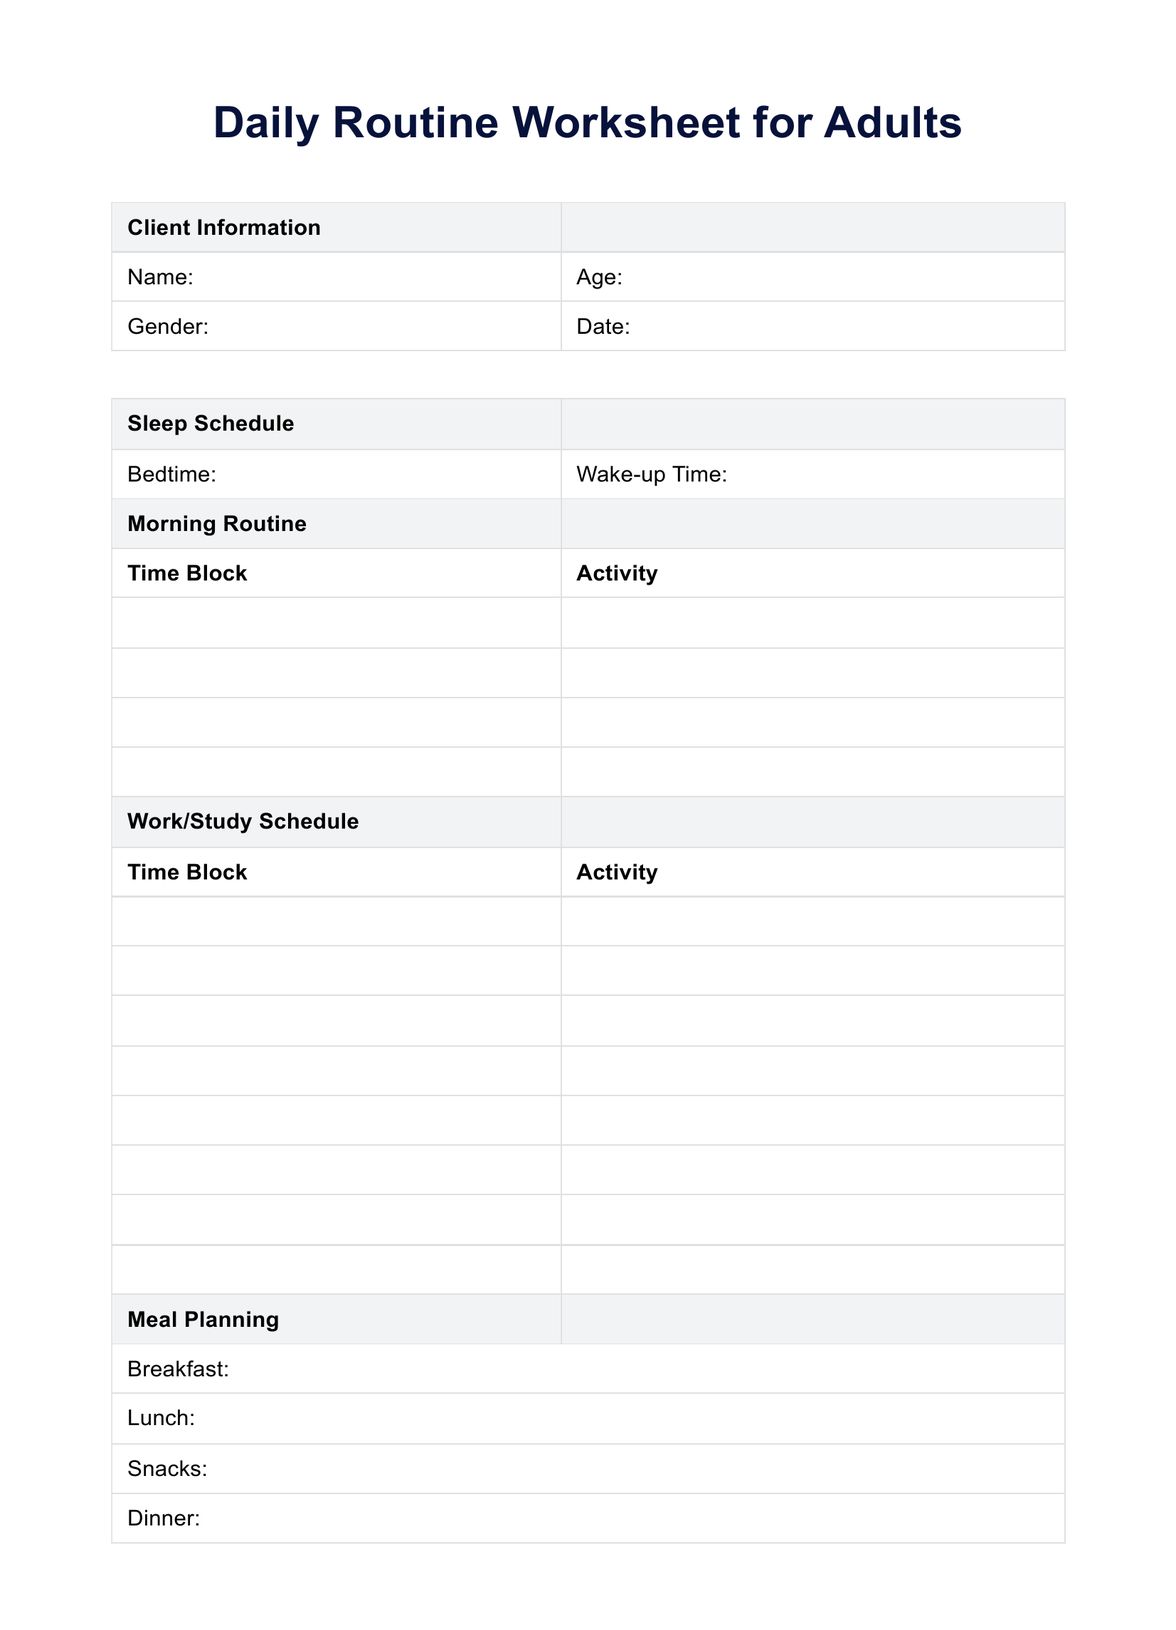 What is a Daily Routine Worksheet for Adults? PDF Example